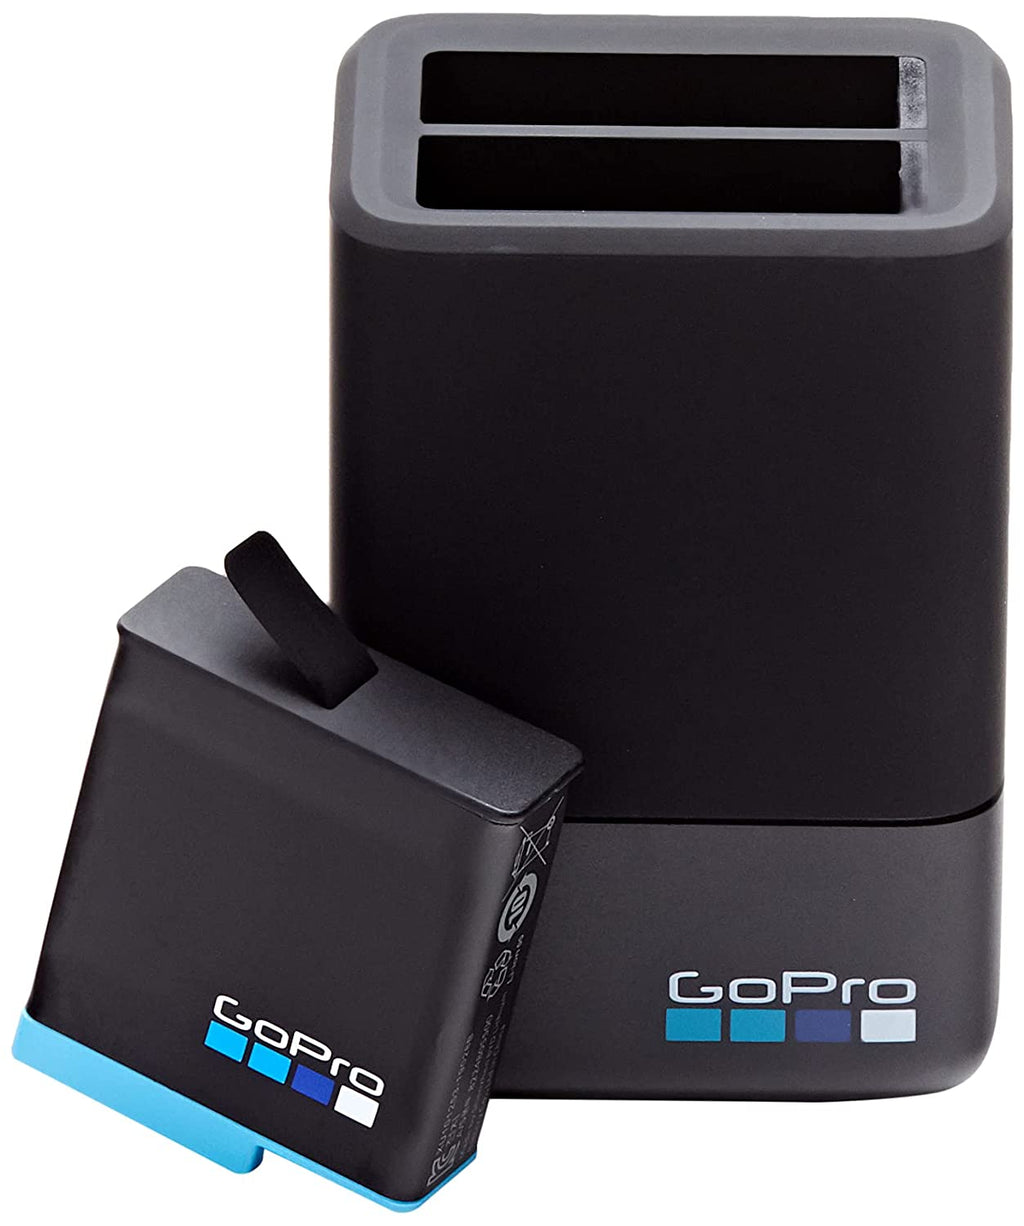 Open Box, Unused Gopro AJDBD-001-EU Dual Battery Charger Plus Battery